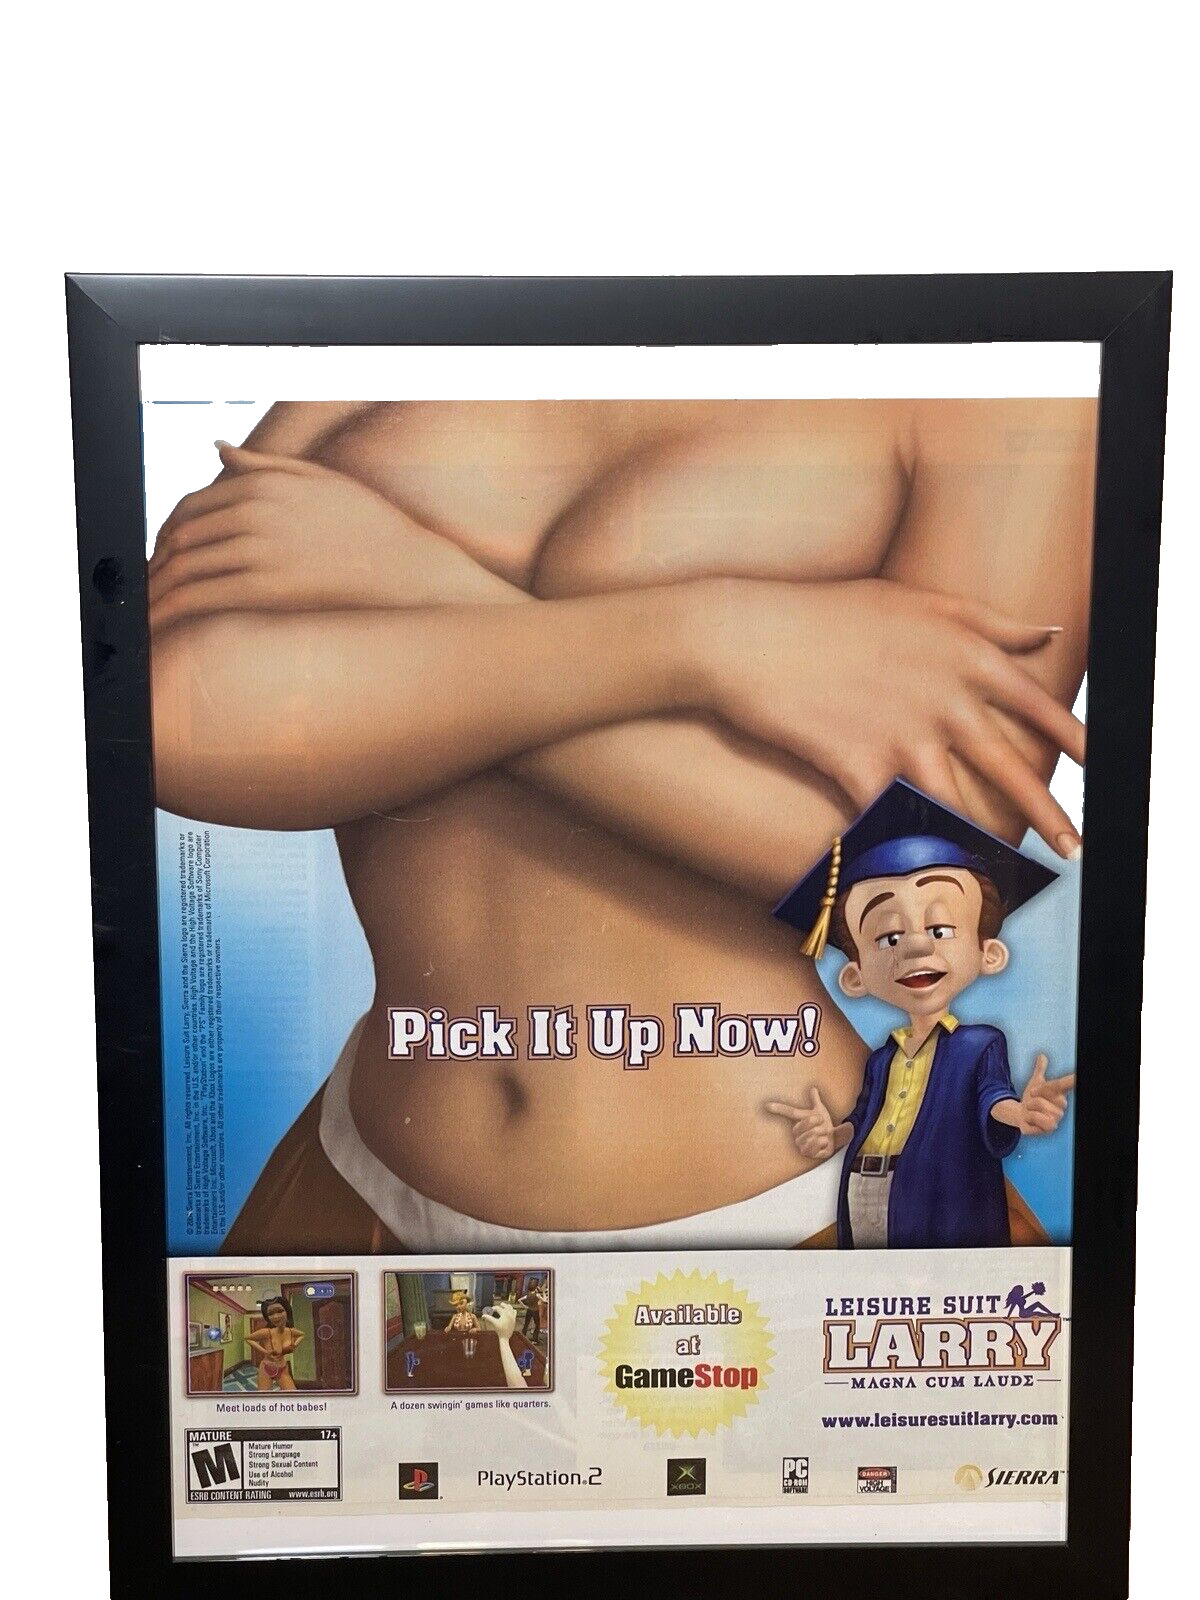 2004 Leisure Suit Larry Framed Print Ad Poster Xbox Sony PS2 Video Game Art